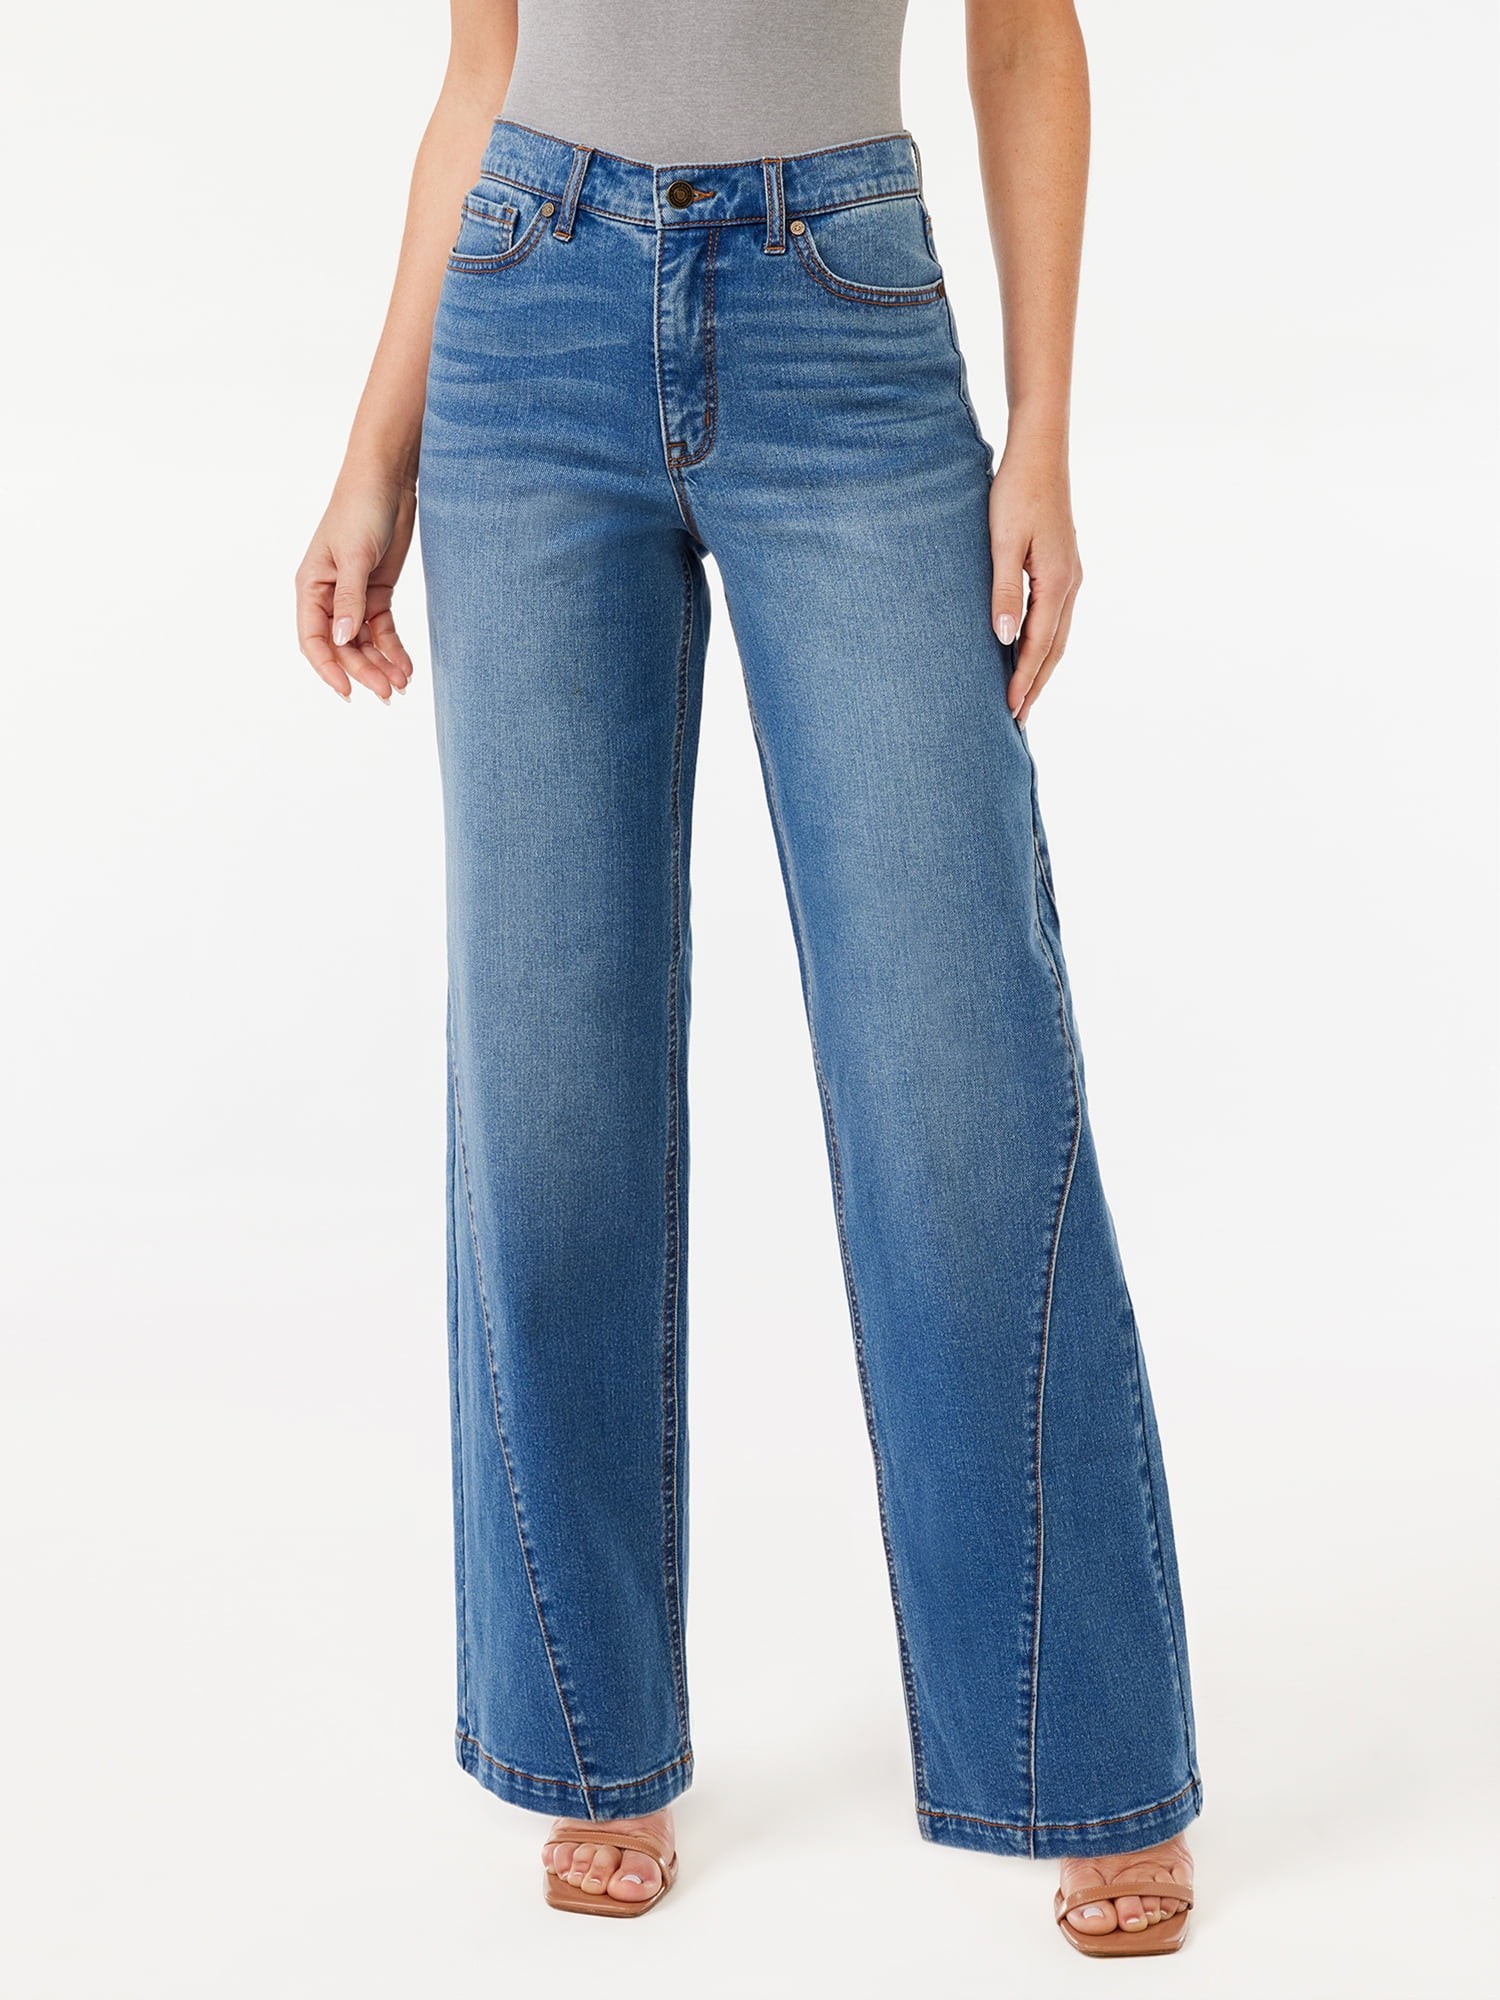 Sofia Jeans by Sofia Vergara Women's Plus Size Diana Super High Rise  Palazzo Jeans with Gusset 